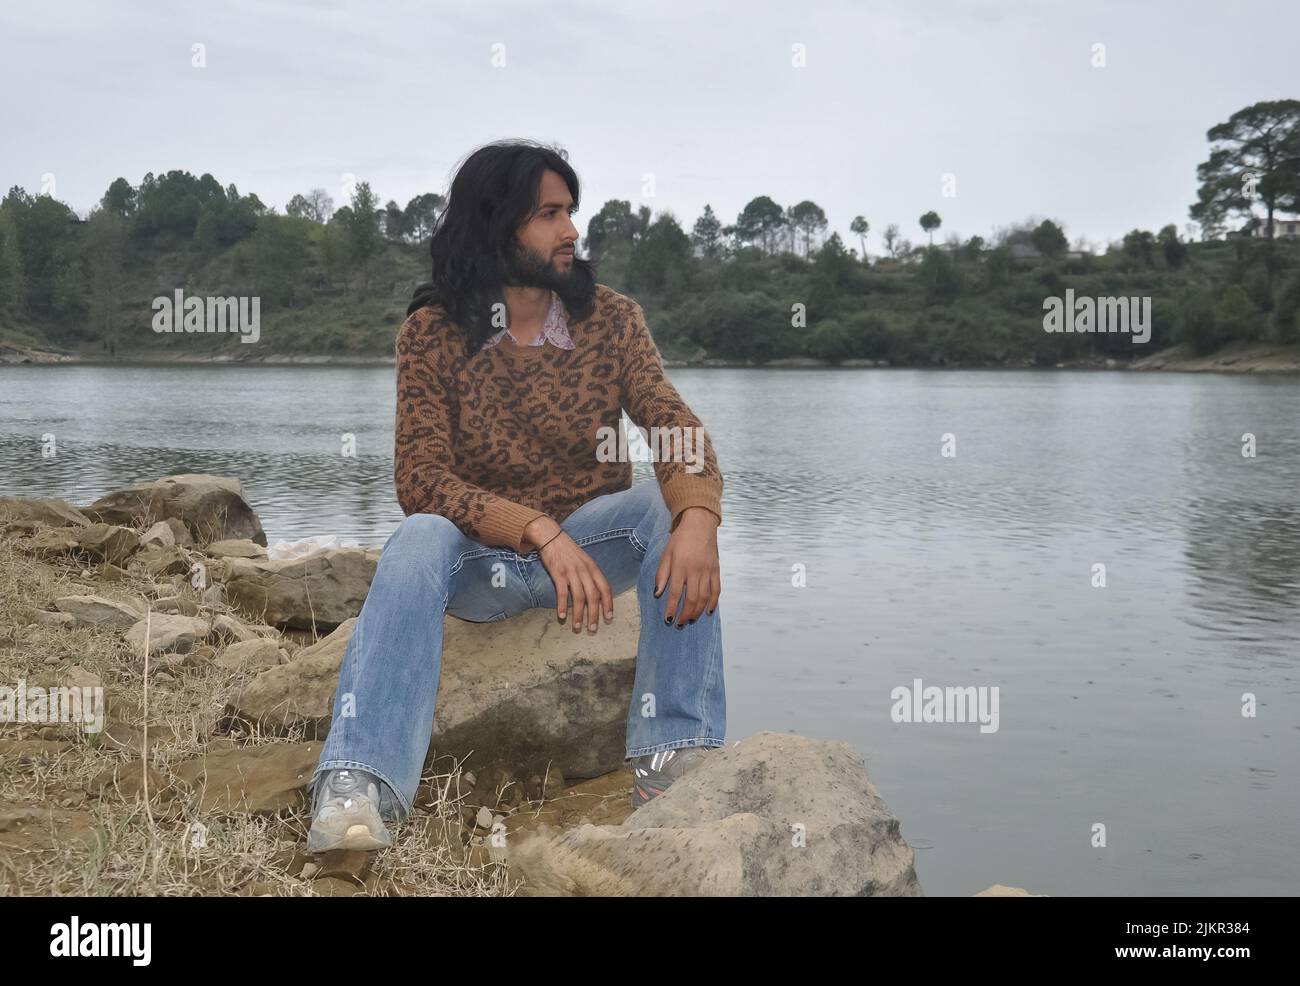 A good looking young man with long hair and beard looking sideways while sitting on stone by the lake Stock Photo